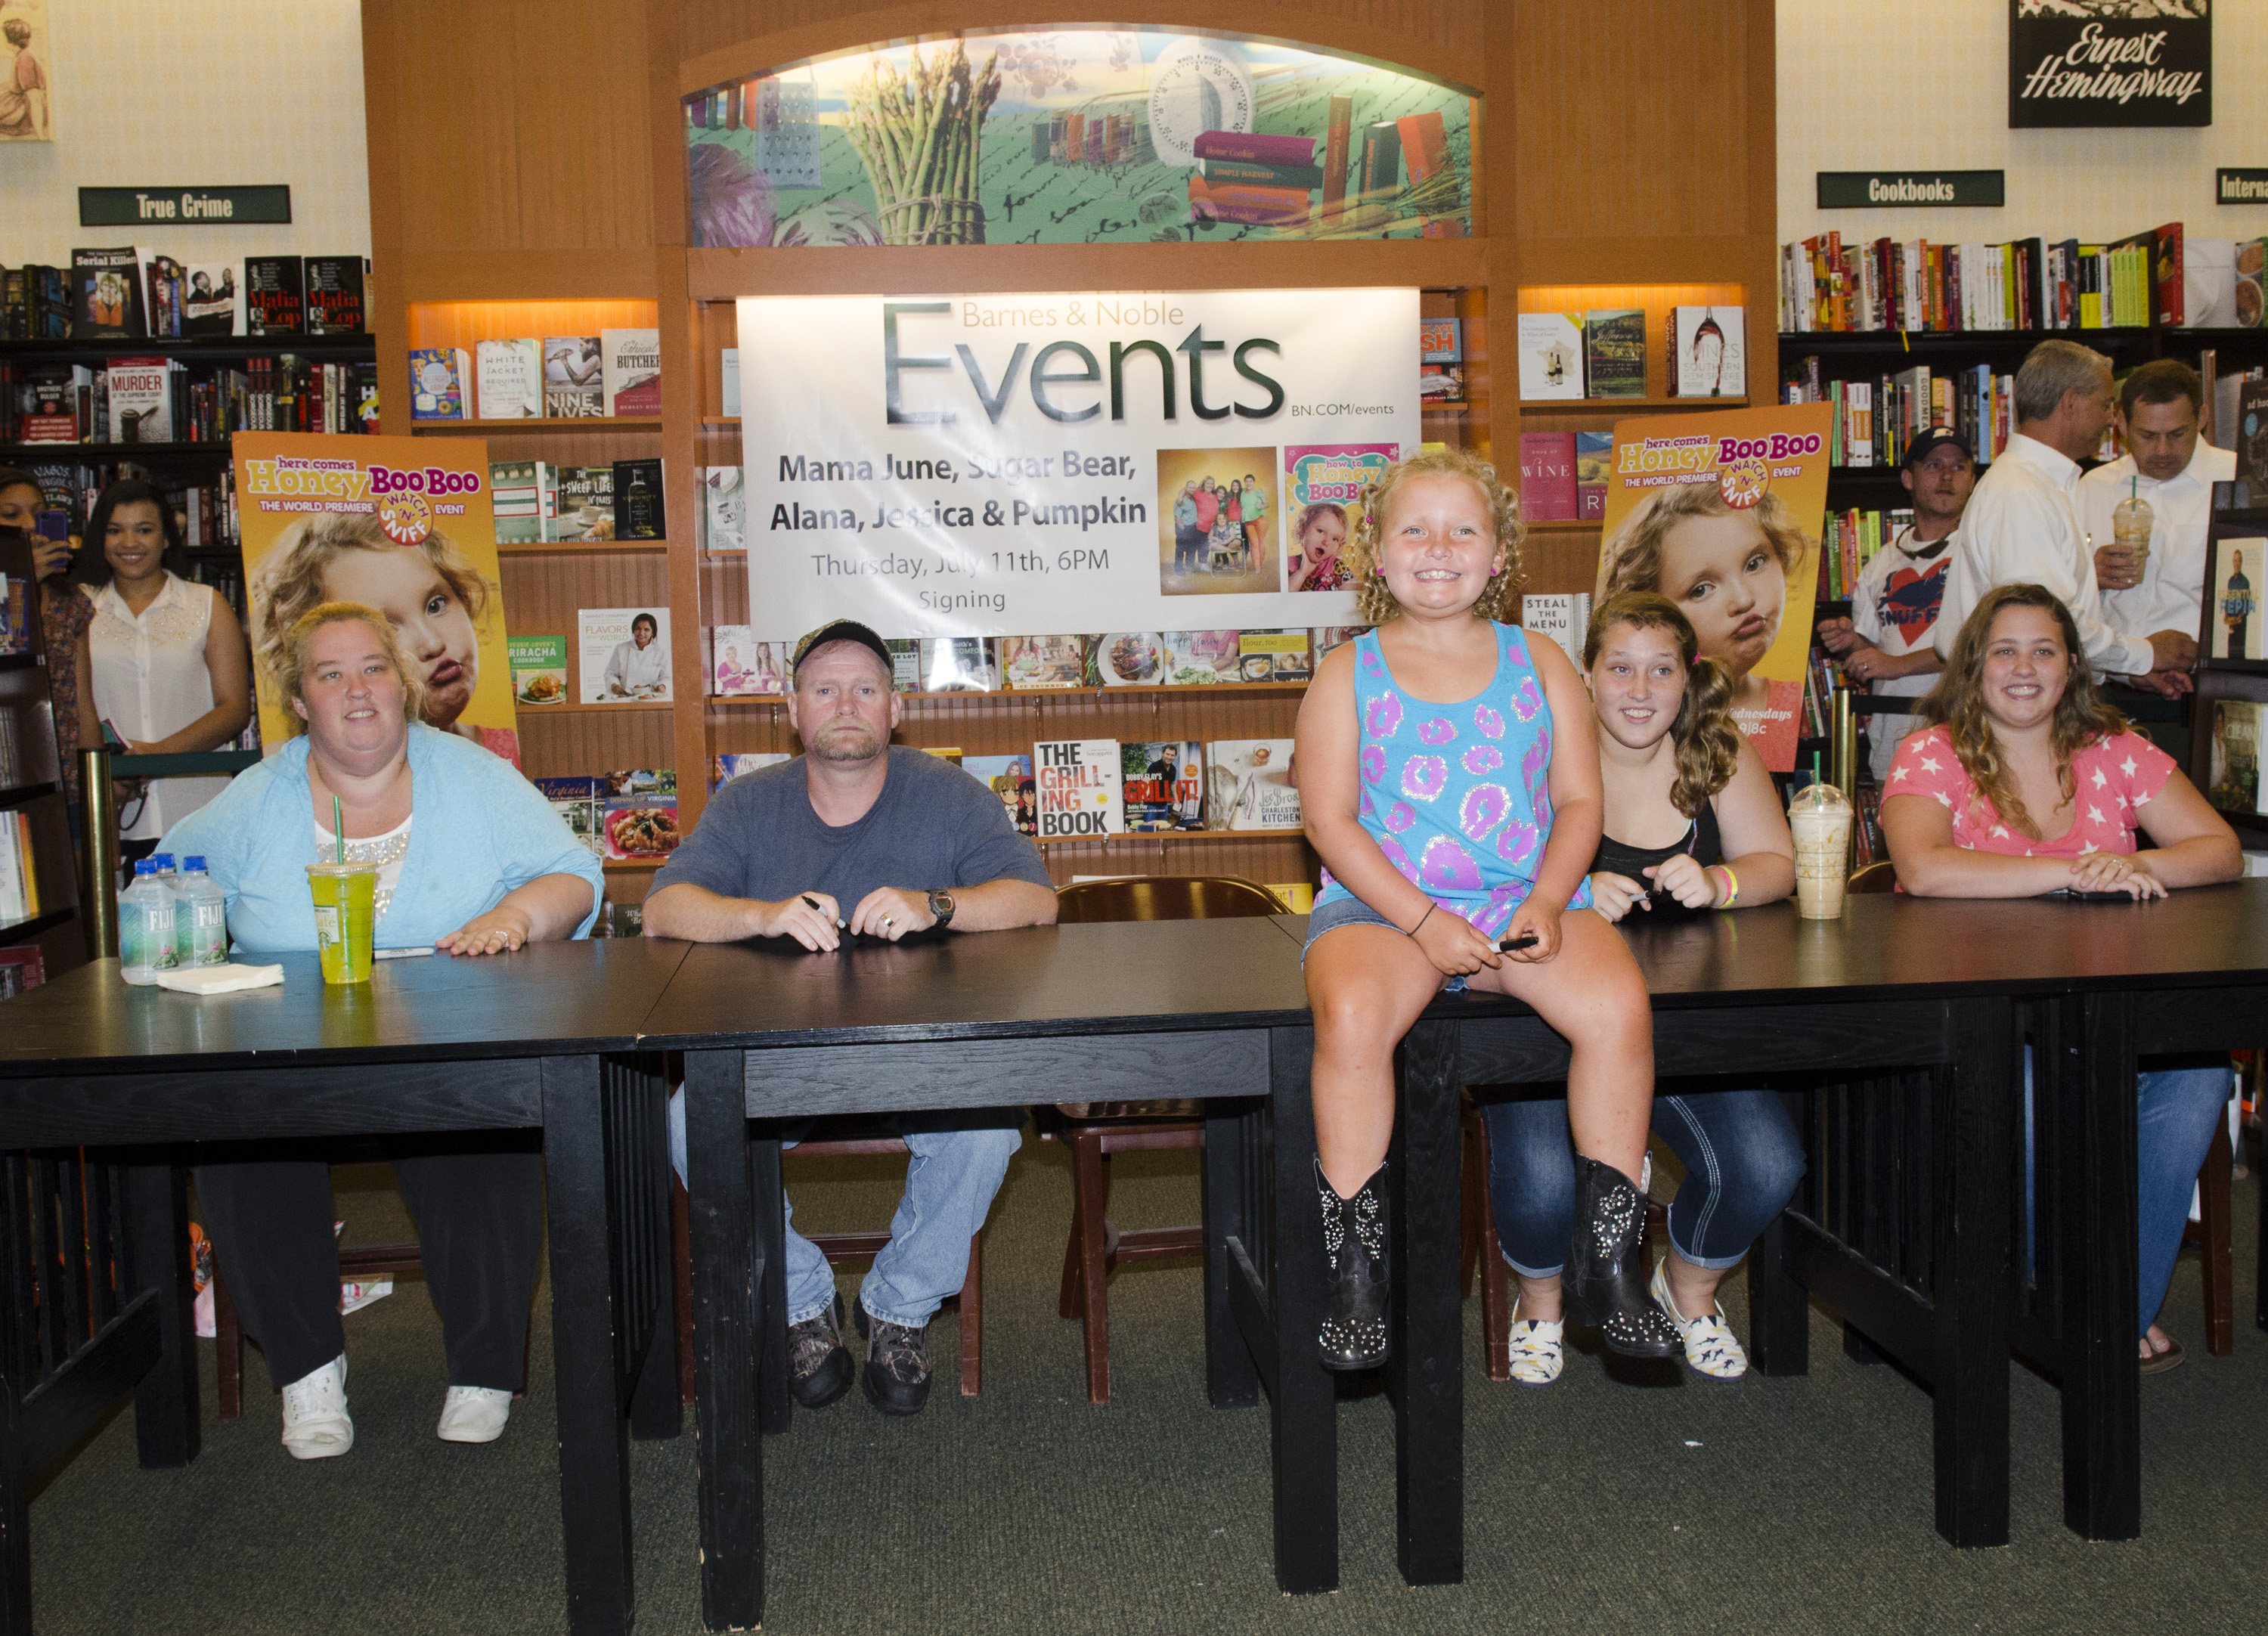 June "Mama" Shannon, Mike "Sugar Bear" Thompson, Alana "Honey Boo Boo" Thompson, Anna "Chickadee" Shannon, and Lauryn "Pumpkin" Shannon at the Barnes and Nobles on July 11, 2013, in Mclean, Virginia | Source: Getty Images